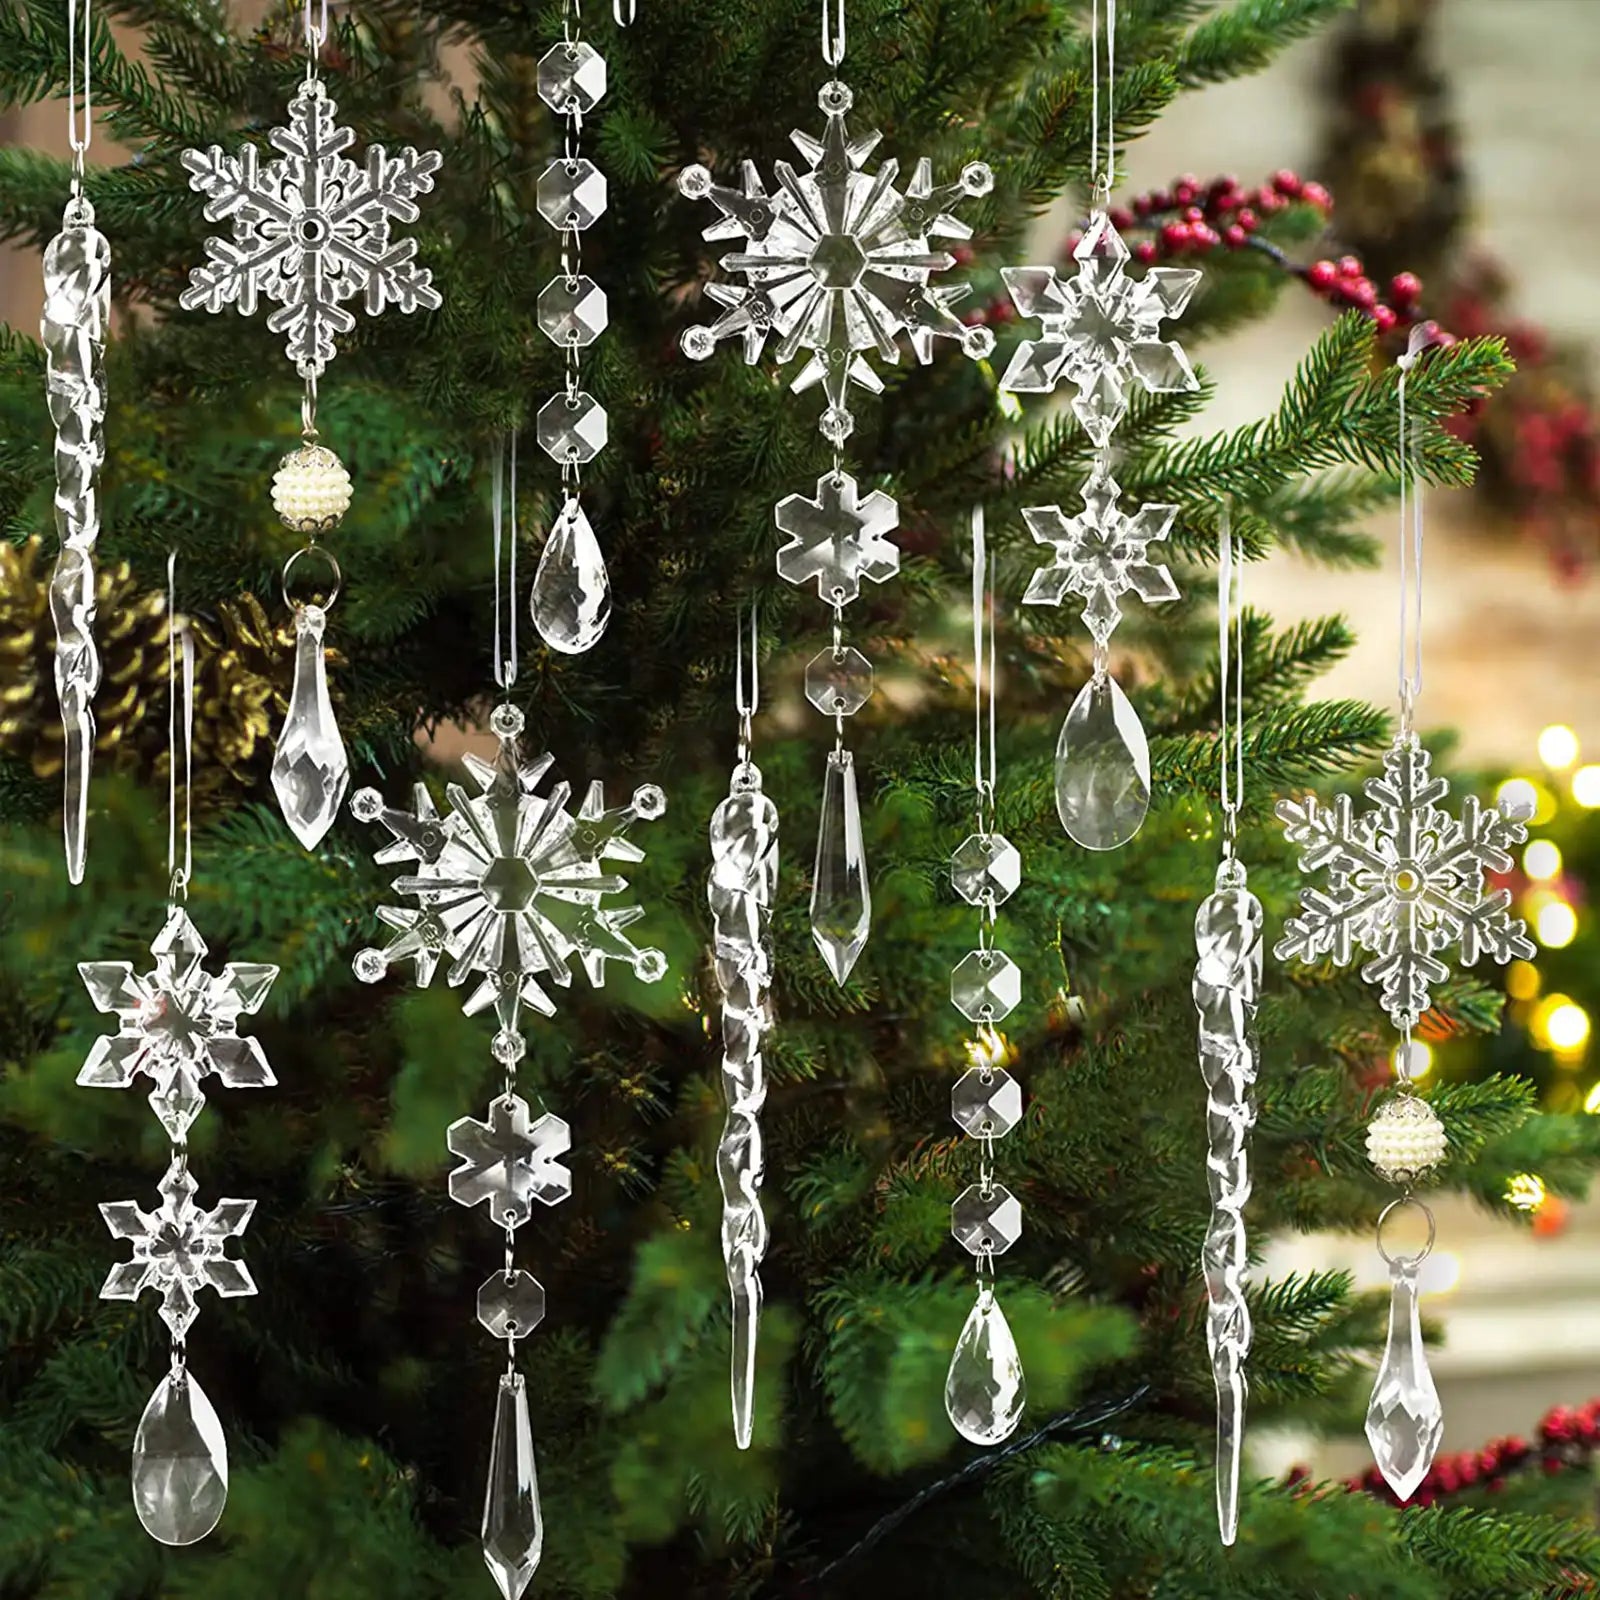 18pcs Crystal Christmas Ornaments for Christmas Tree Decorations-Hanging Acrylic